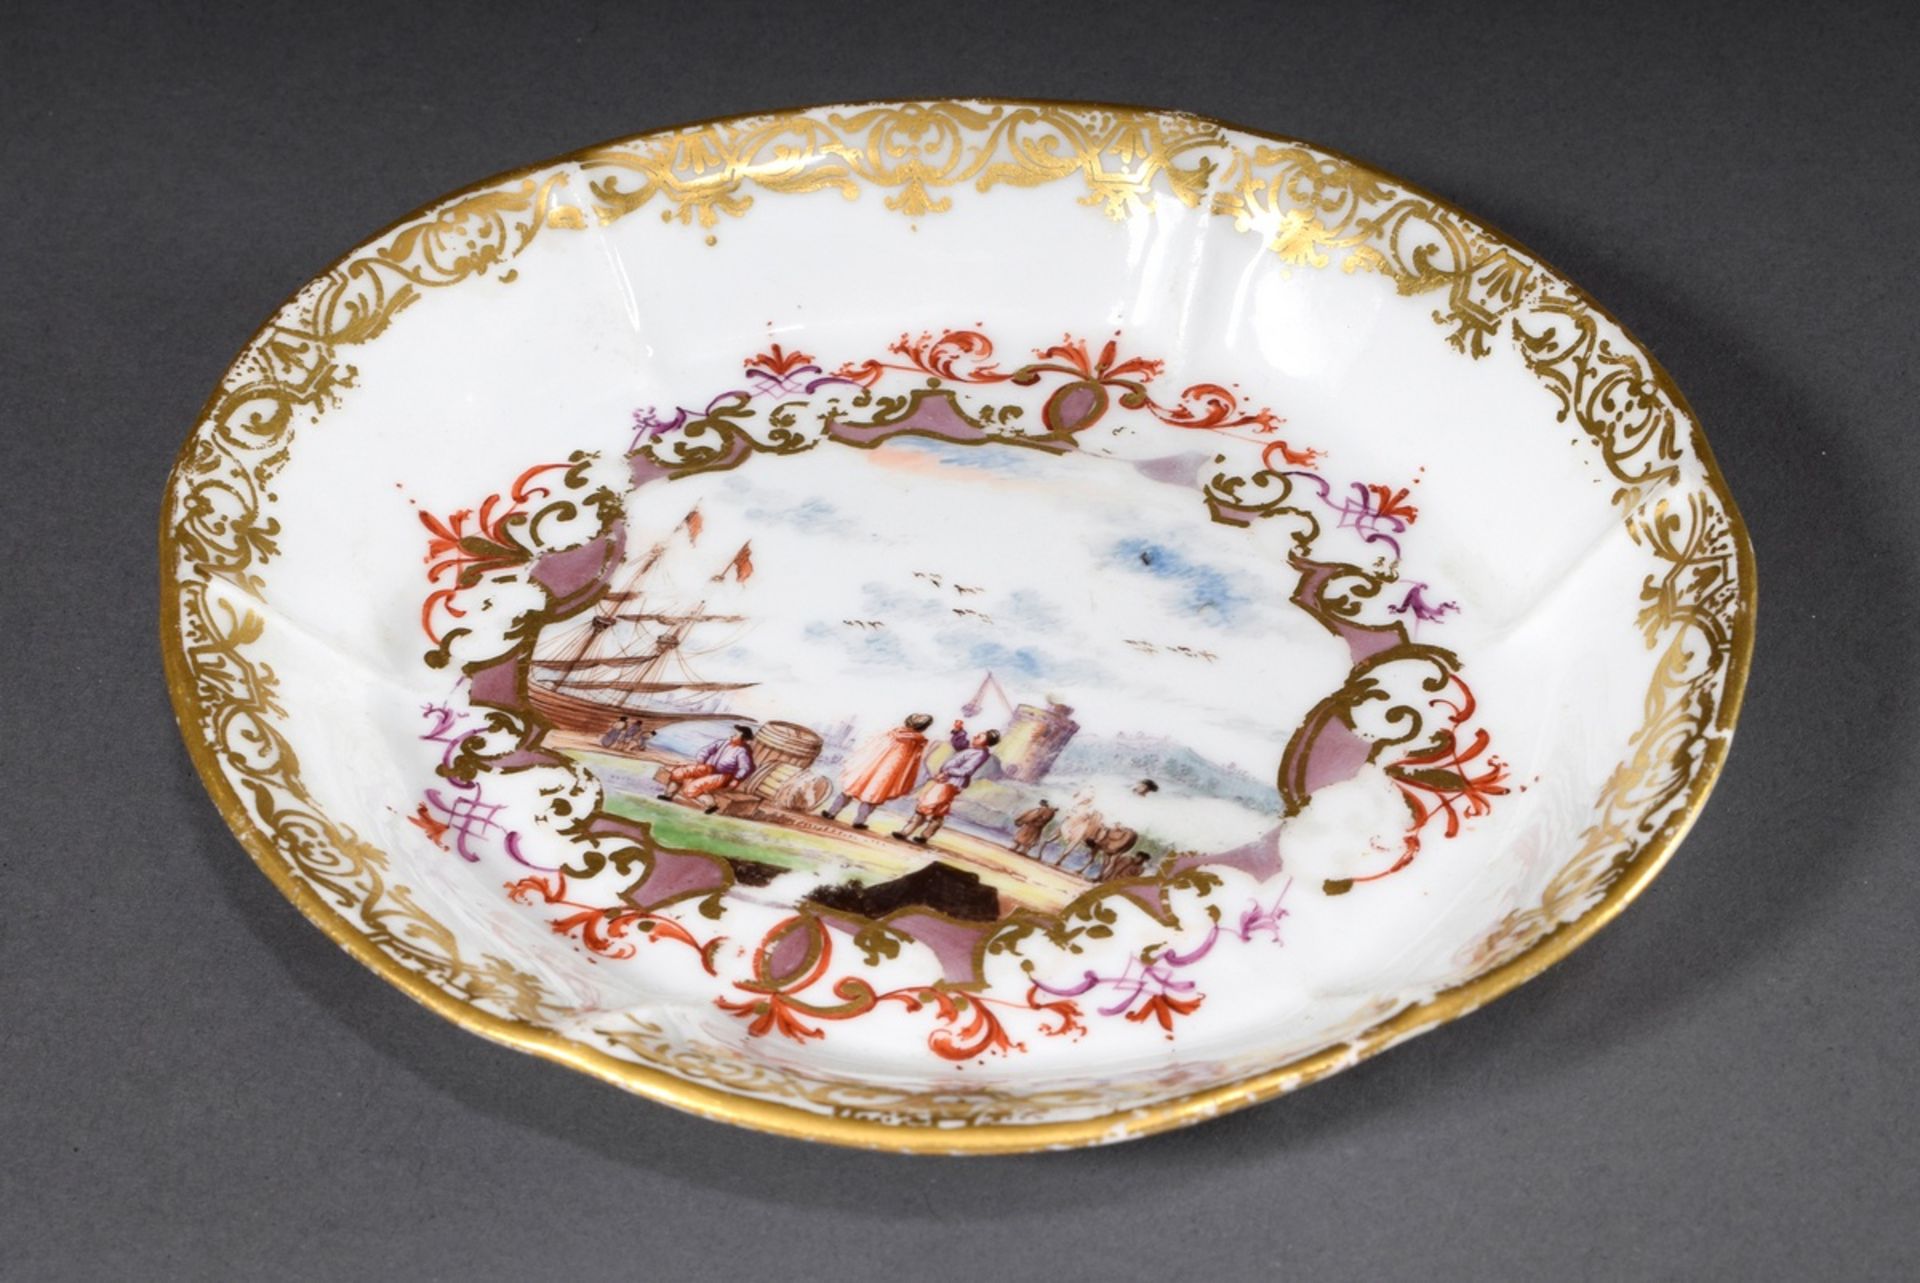 Oval Meissen bowl with polychrome painting in the manner of Christian Friedrich Herold "Kauffahrtei - Image 2 of 5